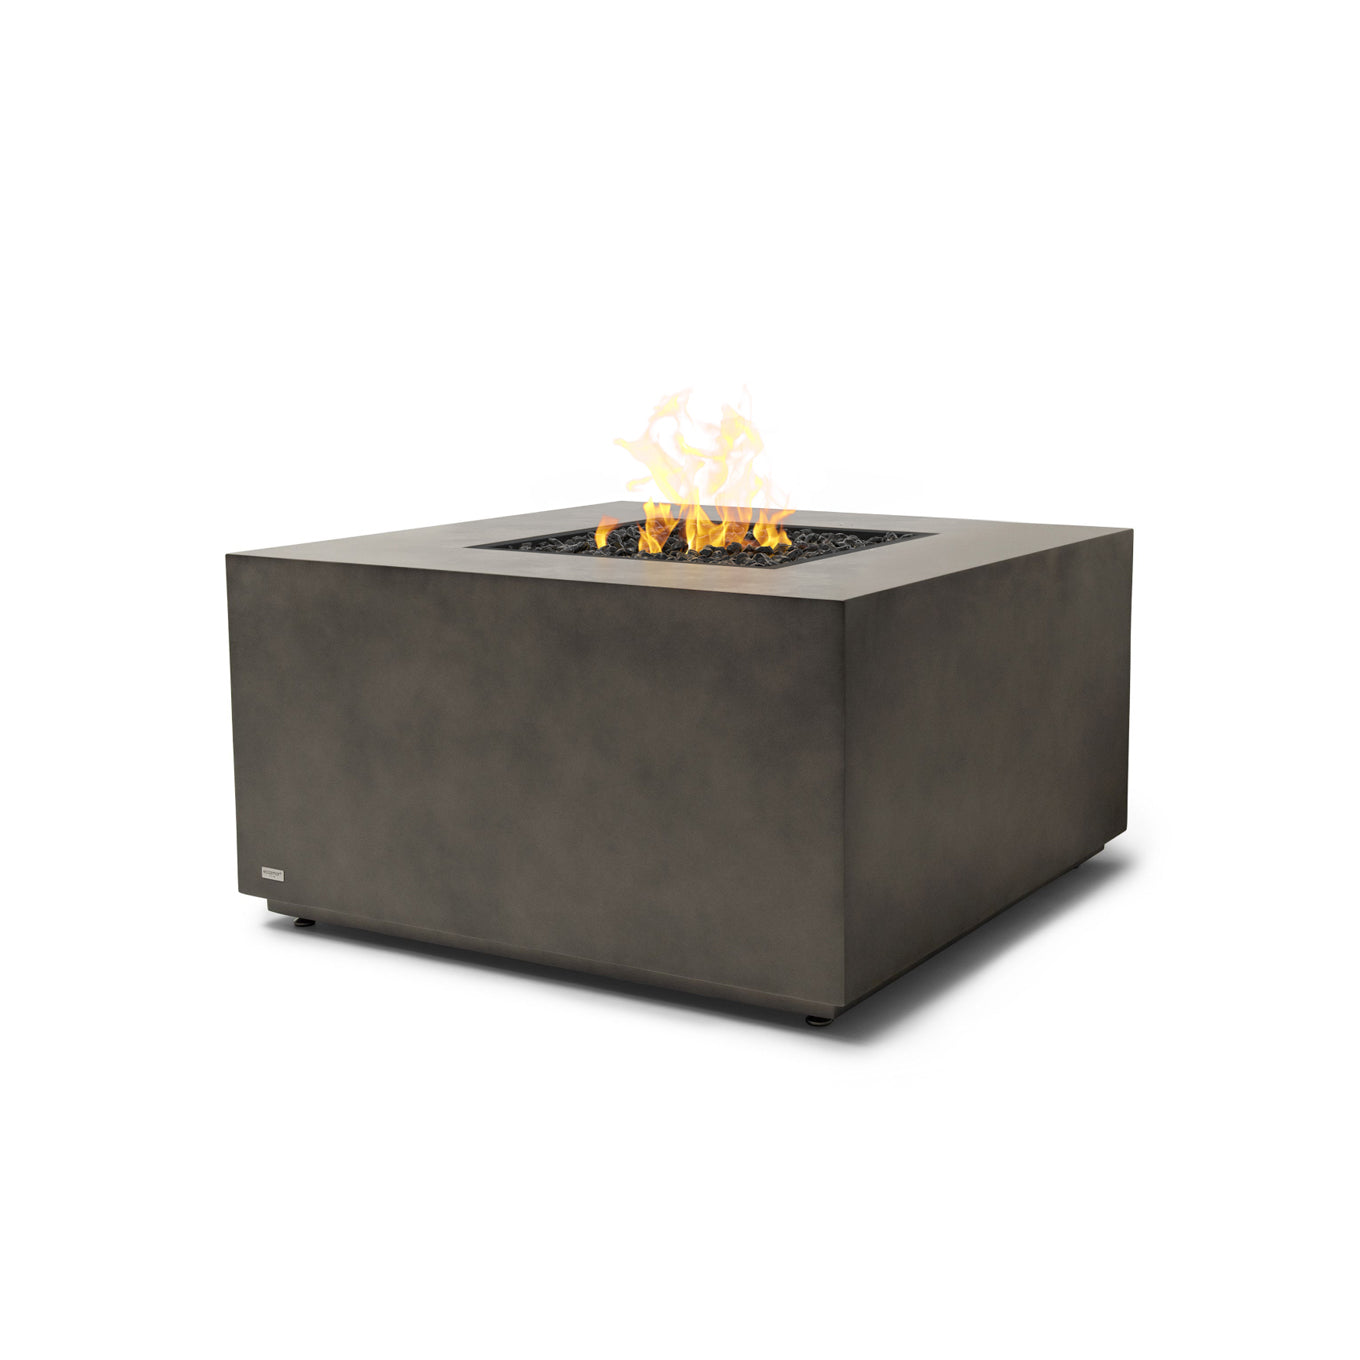 CHASER 38 FIRE PIT TABLE - NATURAL GAS / LIQUID PROPANE